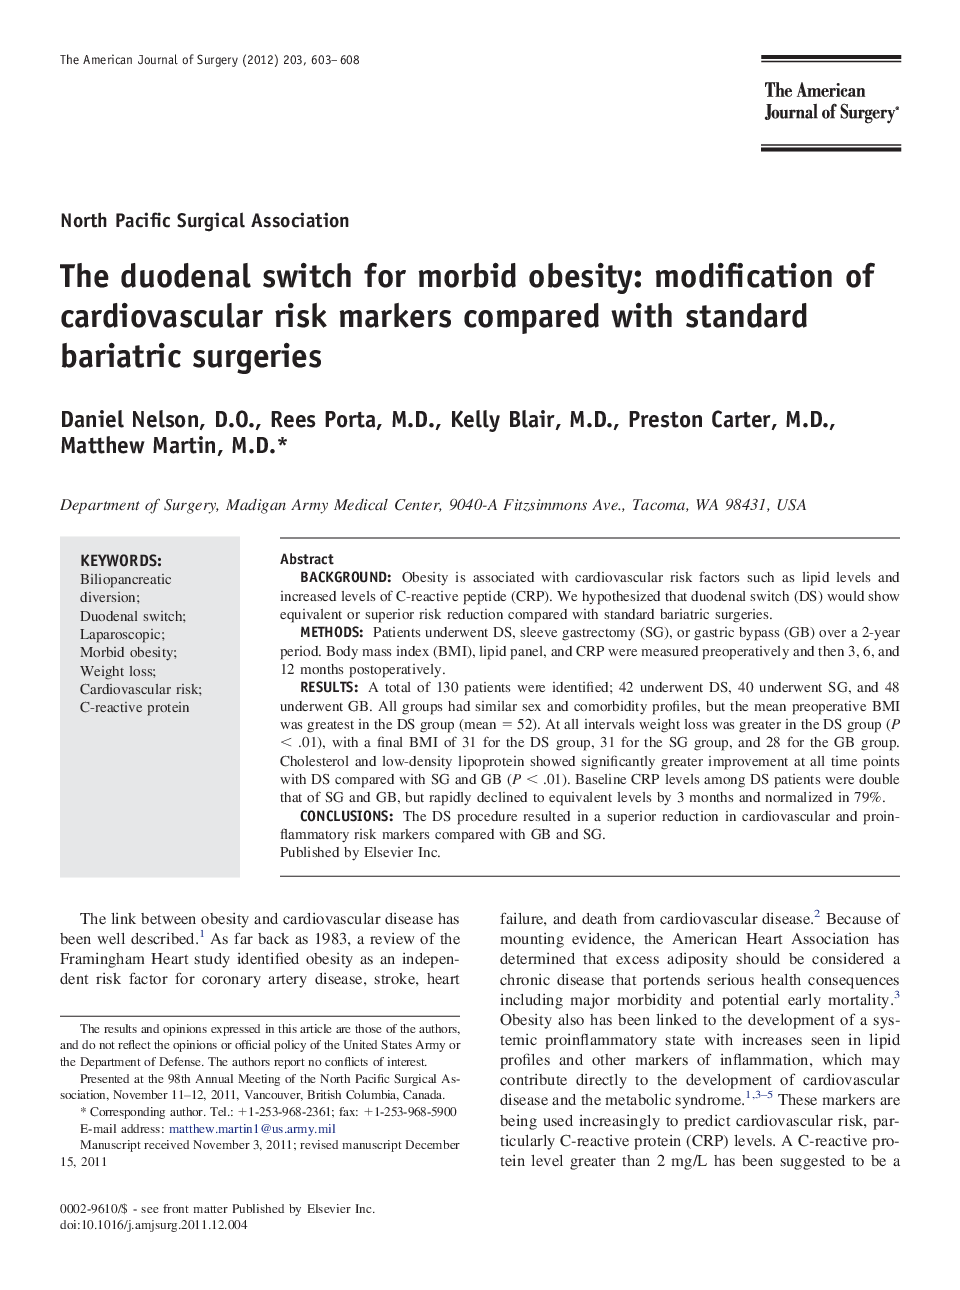 The duodenal switch for morbid obesity: modification of cardiovascular risk markers compared with standard bariatric surgeries 